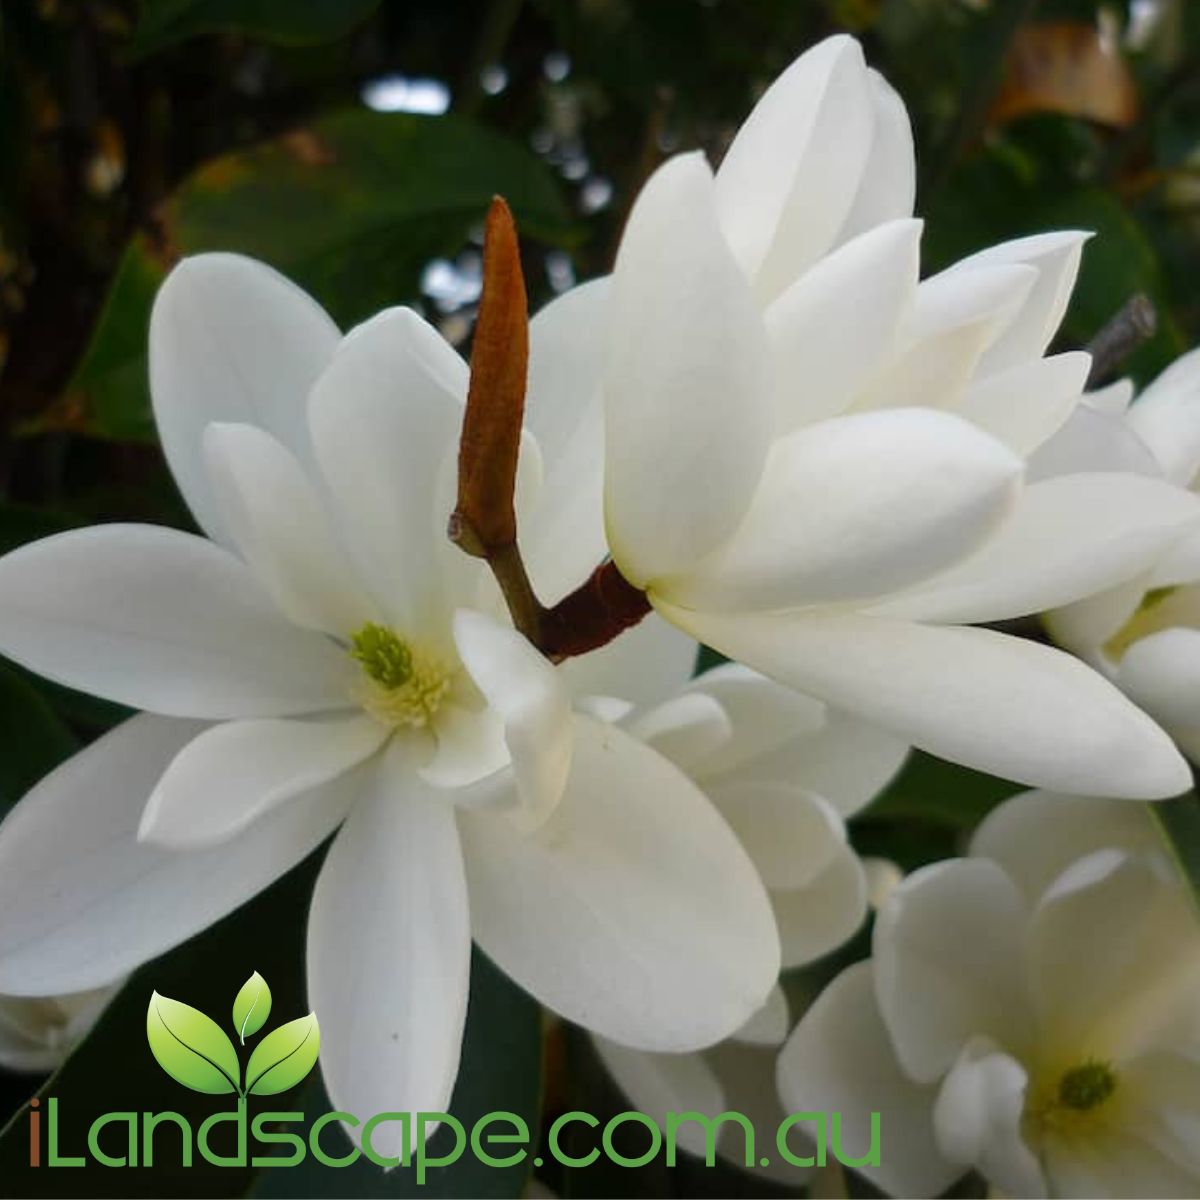 Magnolia inspiration flowers in late winter to early spring however here on the sunshine coast we can get them to flower in late autumn if well kept and fertilised  grows to approx 4.0m however can be kept to around 2.5m really well if pruned    Ideal as a screening plant or a feature plant. Makes an excellent Pot specimen 